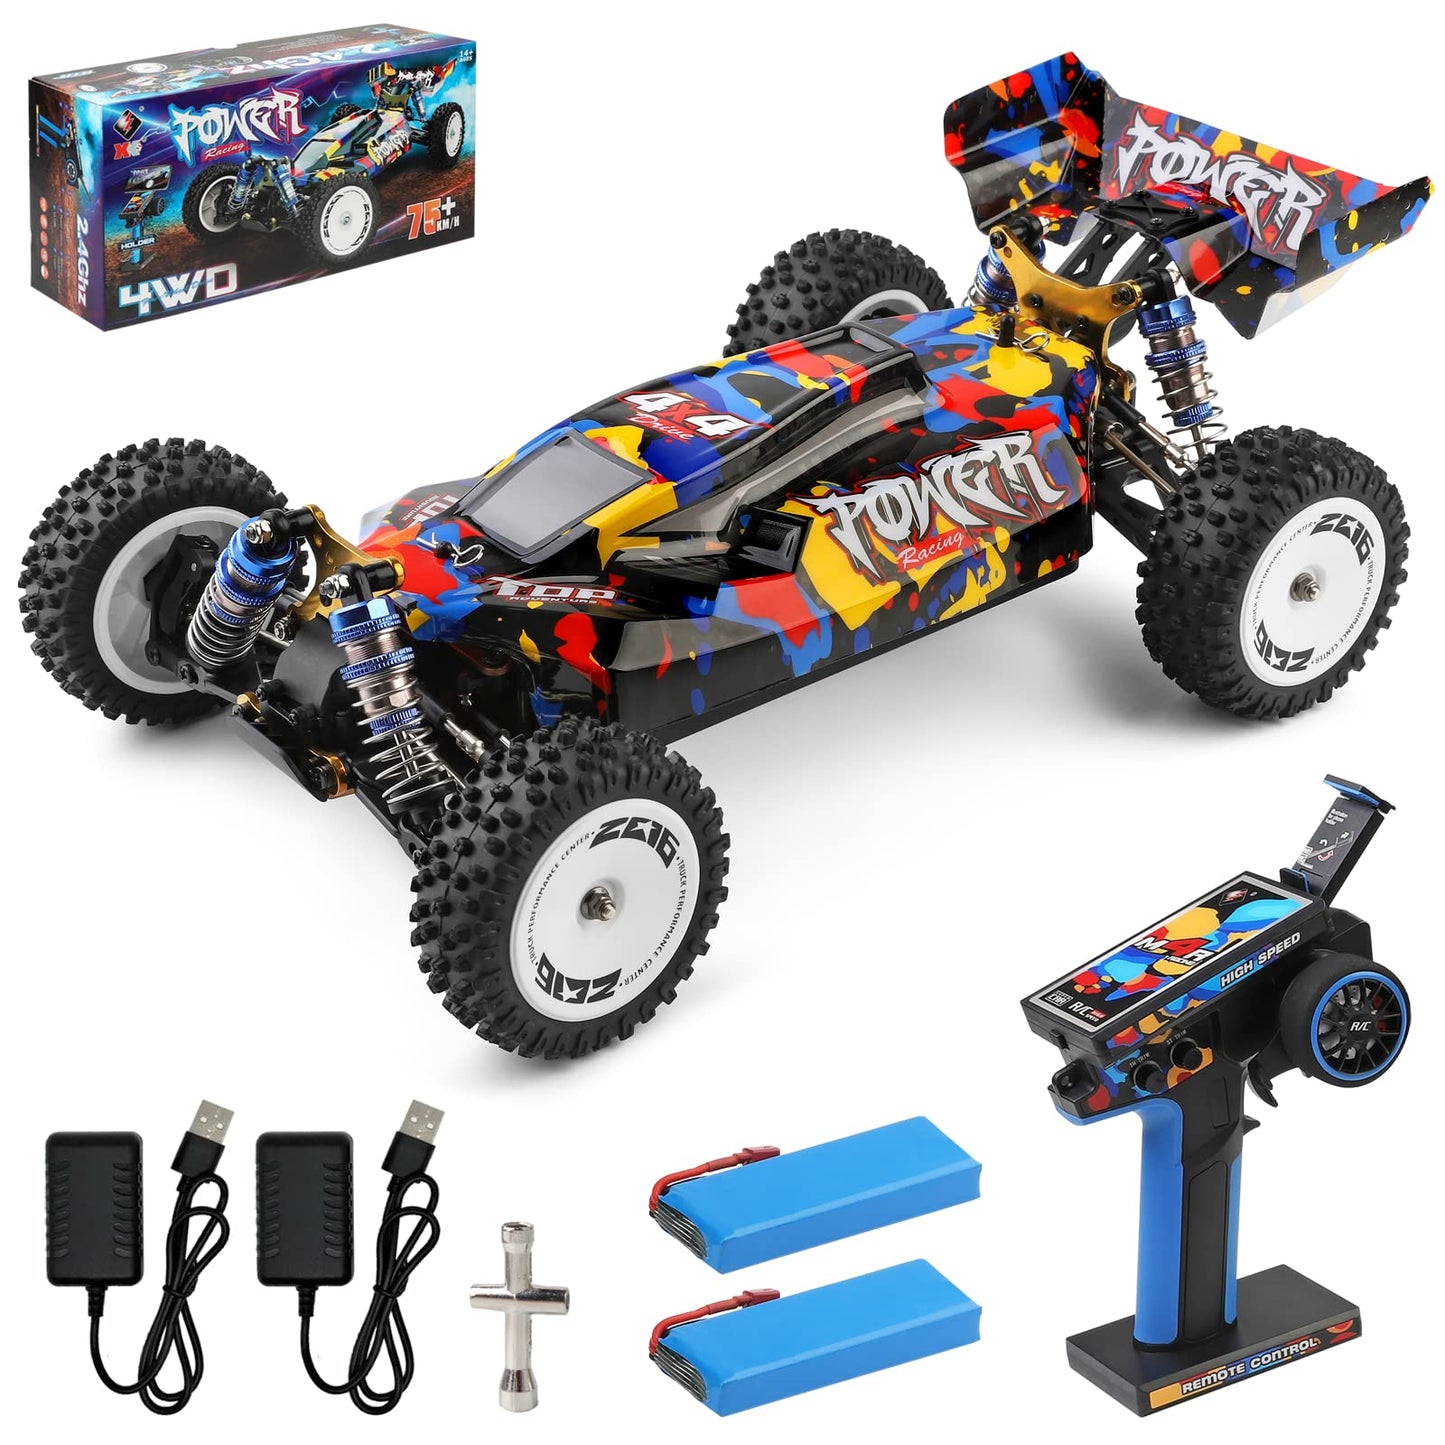 Wltoys 124017 124007 1/12 2.4G Racing RC Cars 4WD Brushless Motor 75Km/H High Speed Remote Control Off-road Drift Toys For Aduit